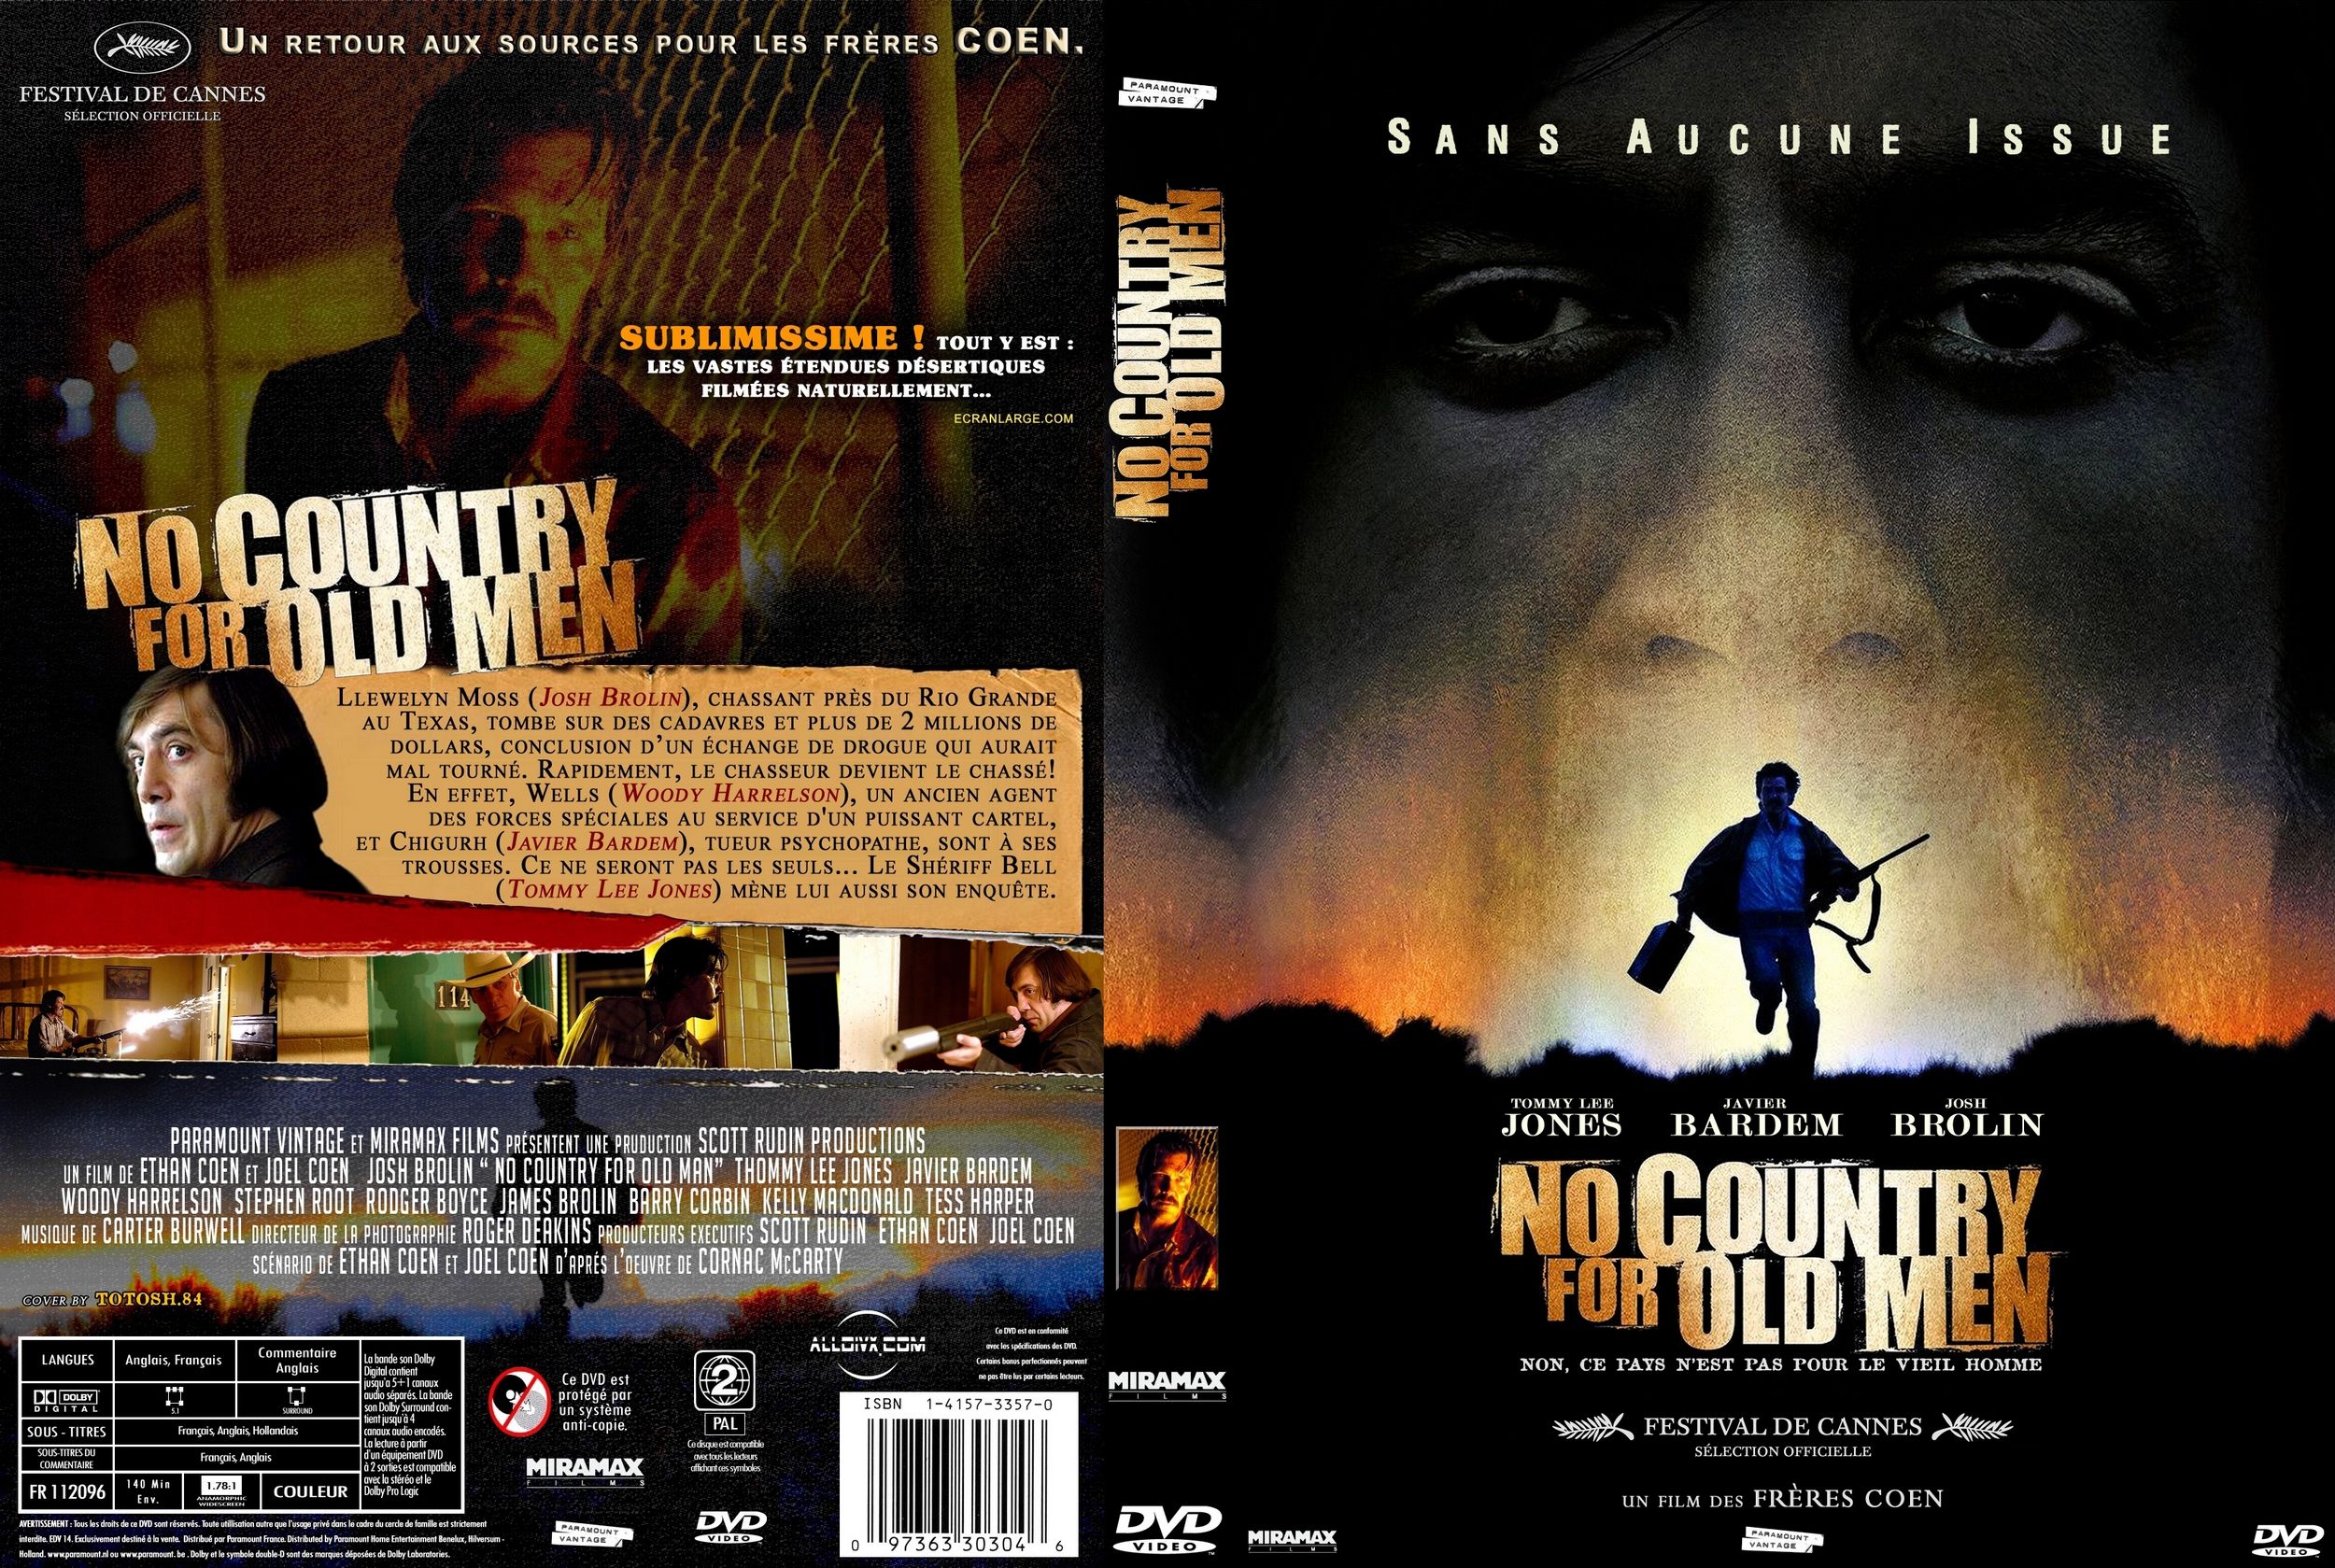 No country for old men full movie in hindi download 720p